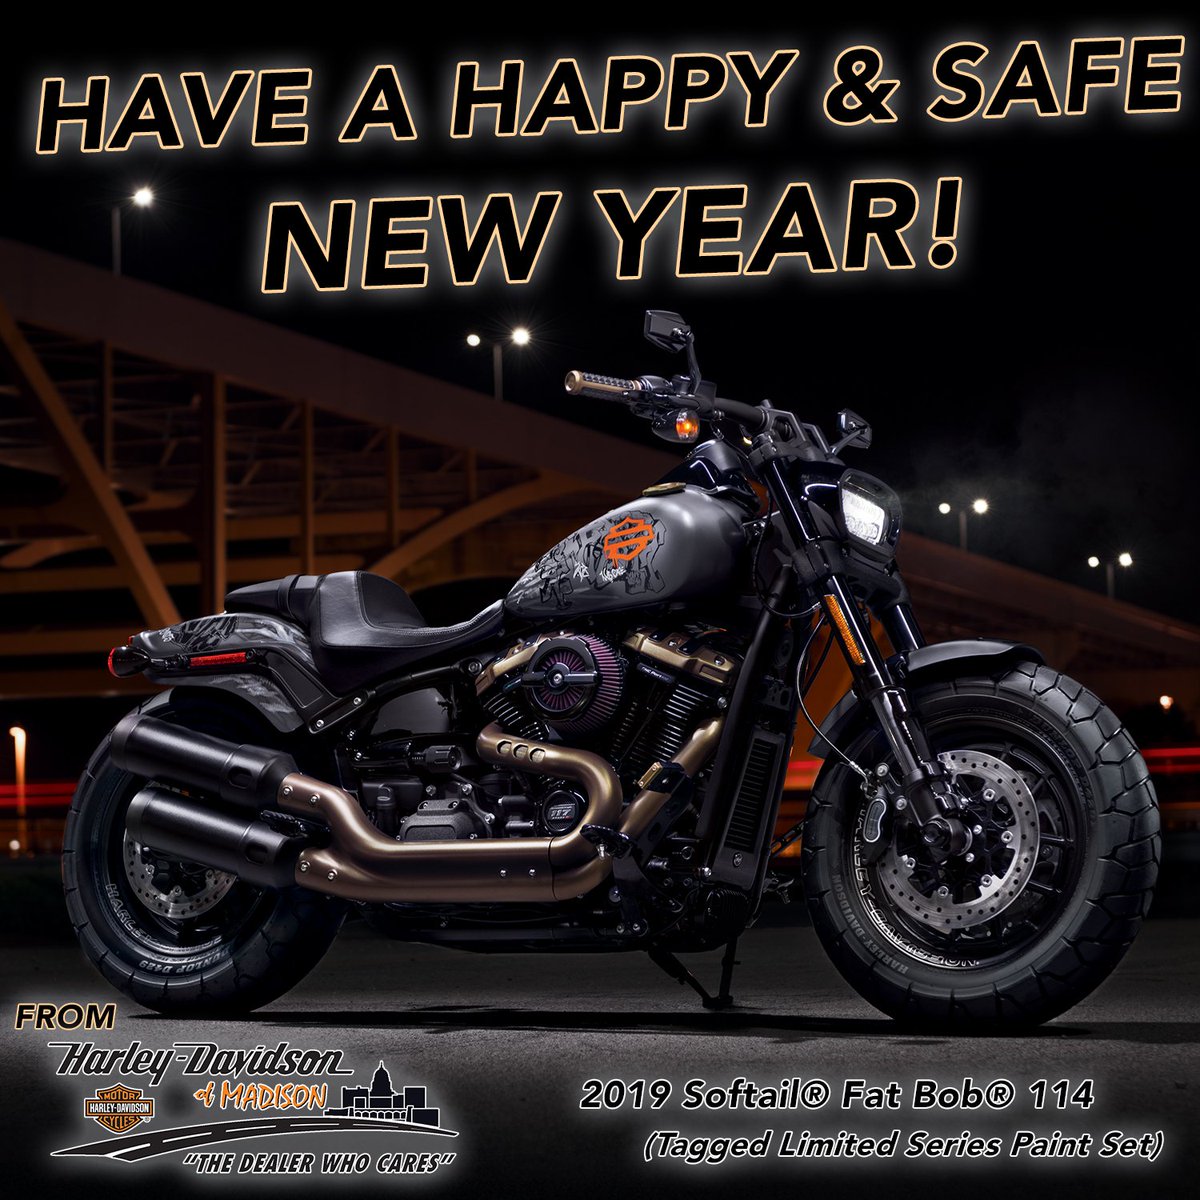 Happy New Year from @hdofmadison! #HappyNewYear #Newyearsresolution #Newyears2018 #2019 #Goodbye2018 #Hello2019 #Celebrate #Fireworks #Holidays #hdofmadison #thedealerwhocares #hdmc #harley #freedommachine #softailbreakout #softail #breakout #LaJolla #LimitedSeries #PaintSet